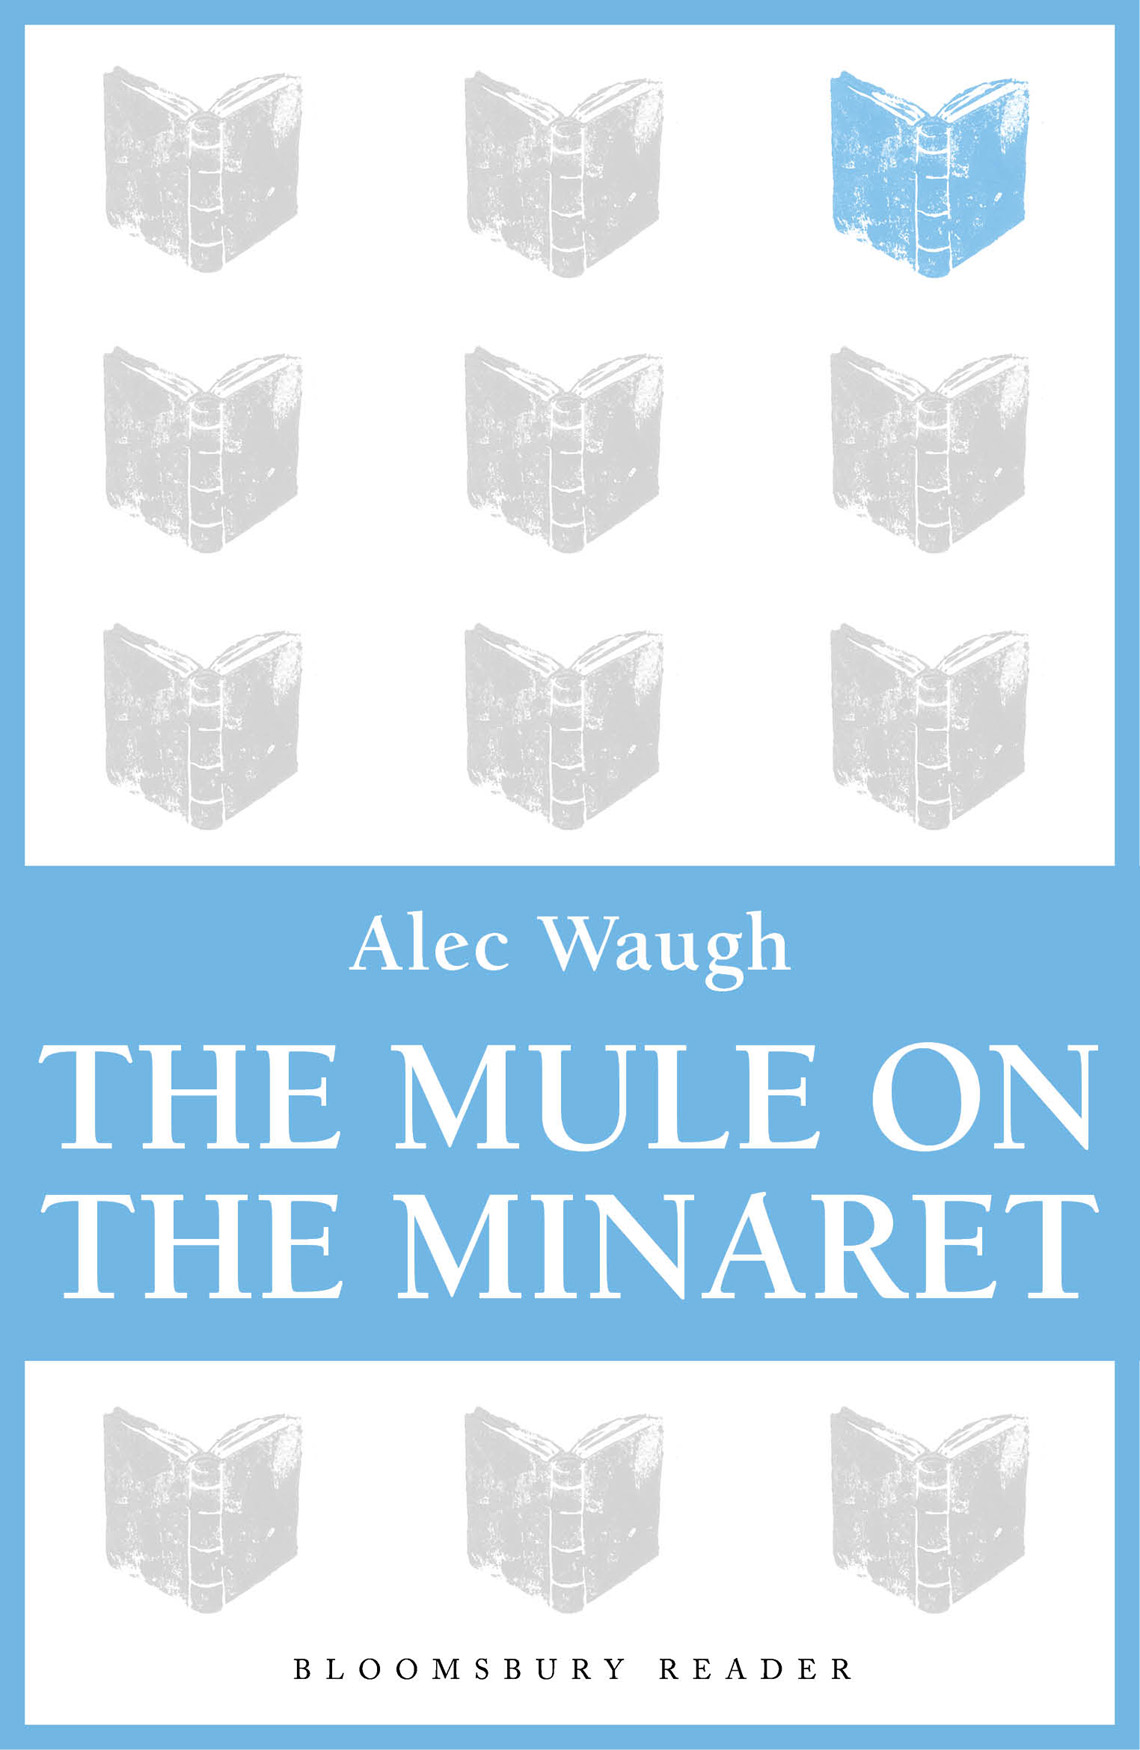 The Mule on the Minaret (1965)